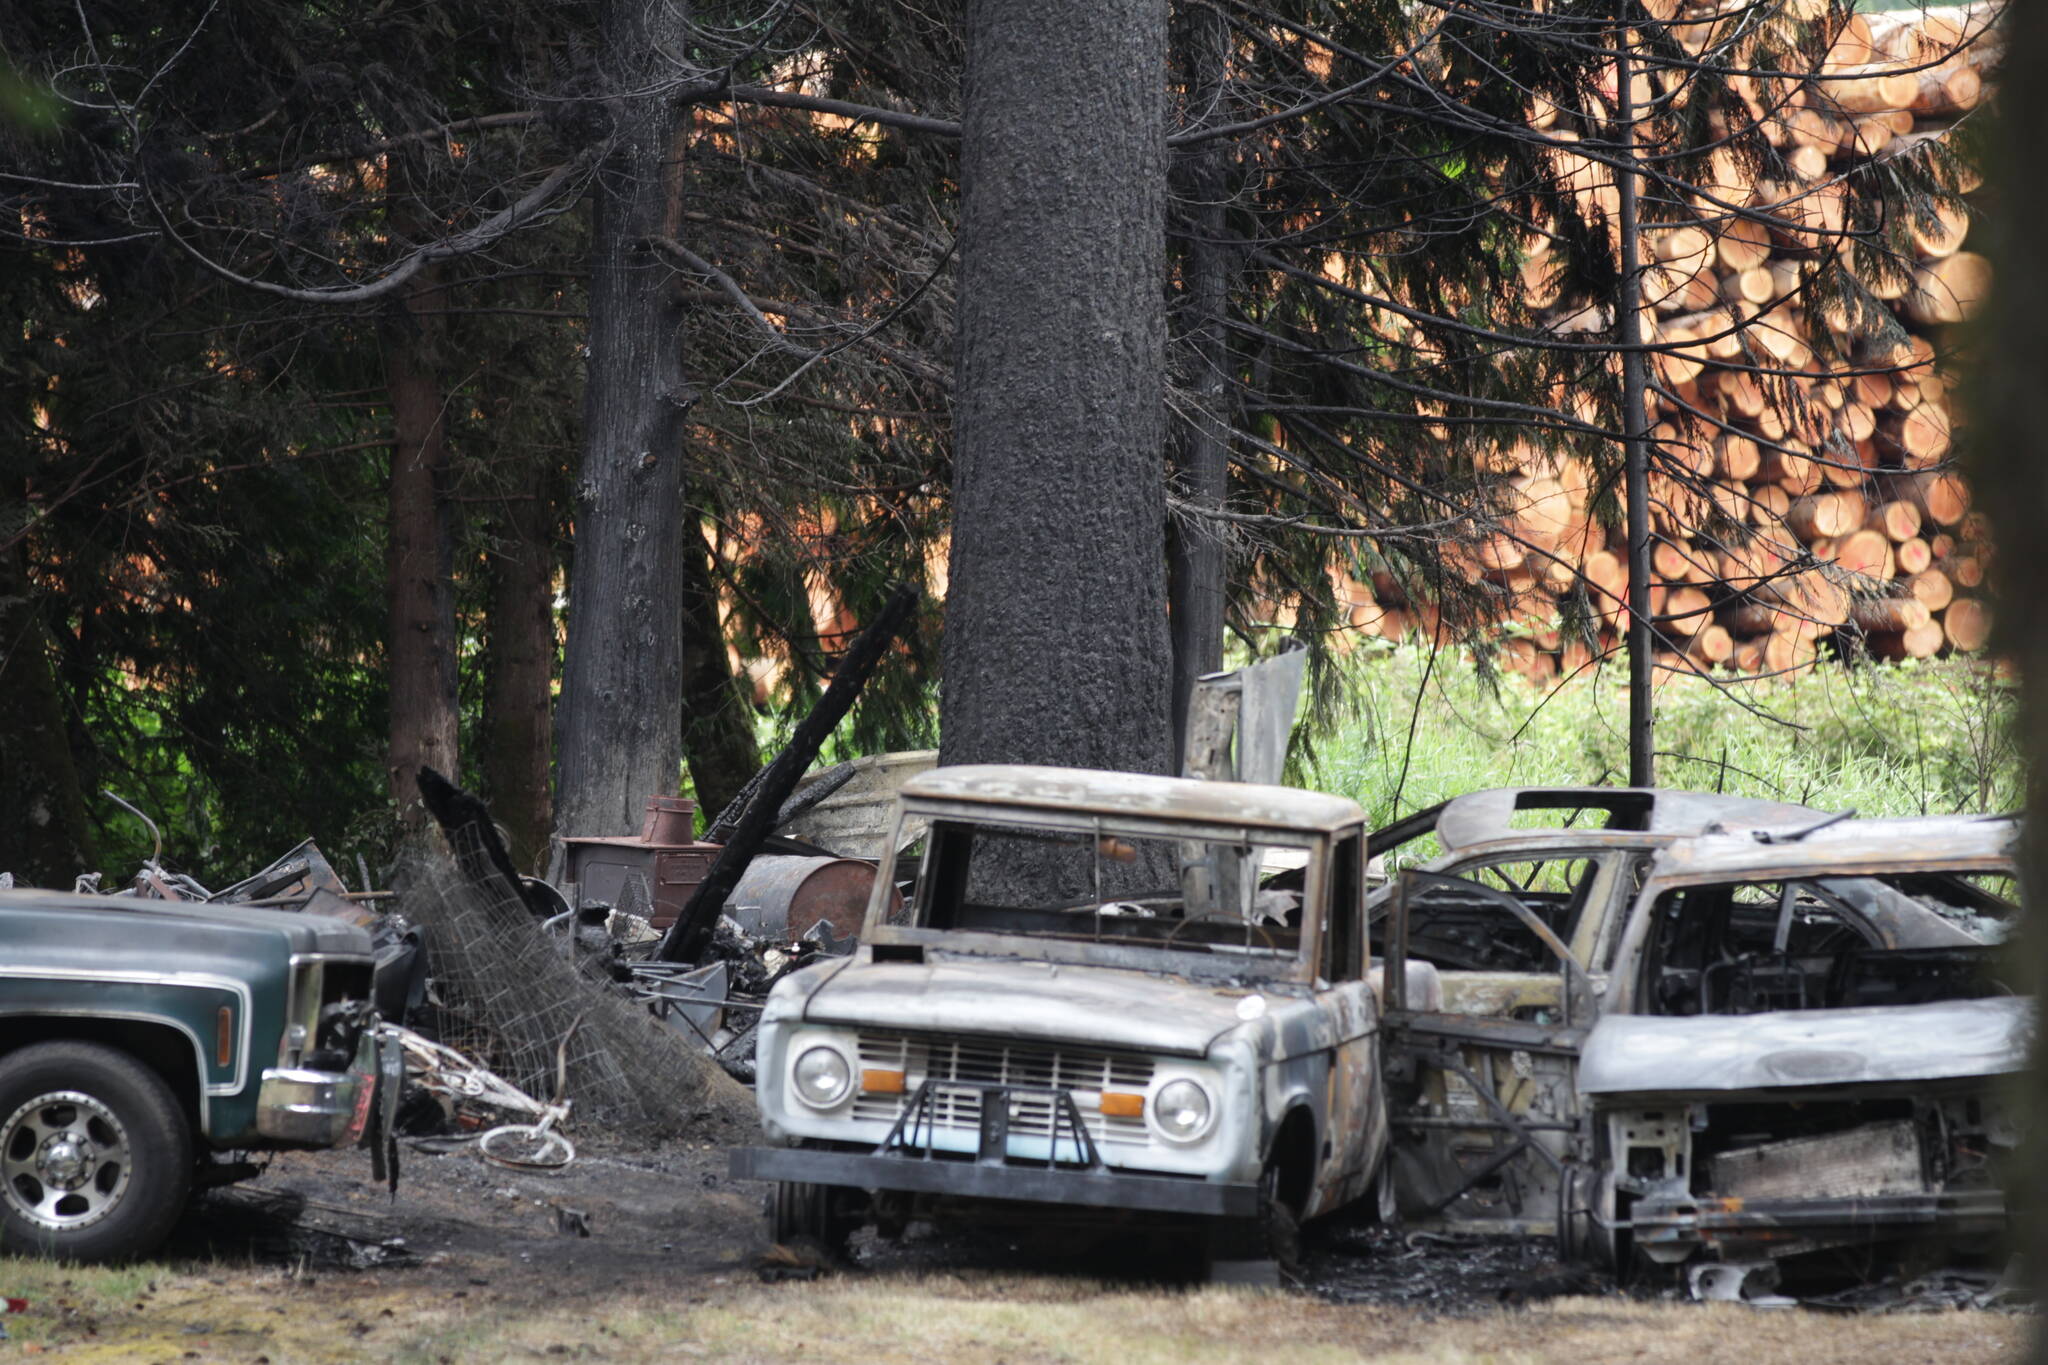 Charred trees and cars give mute testimony to a fire that threatened to grow out of control near Elma on Saturday. (Michael S. Lockett / The Daily World)